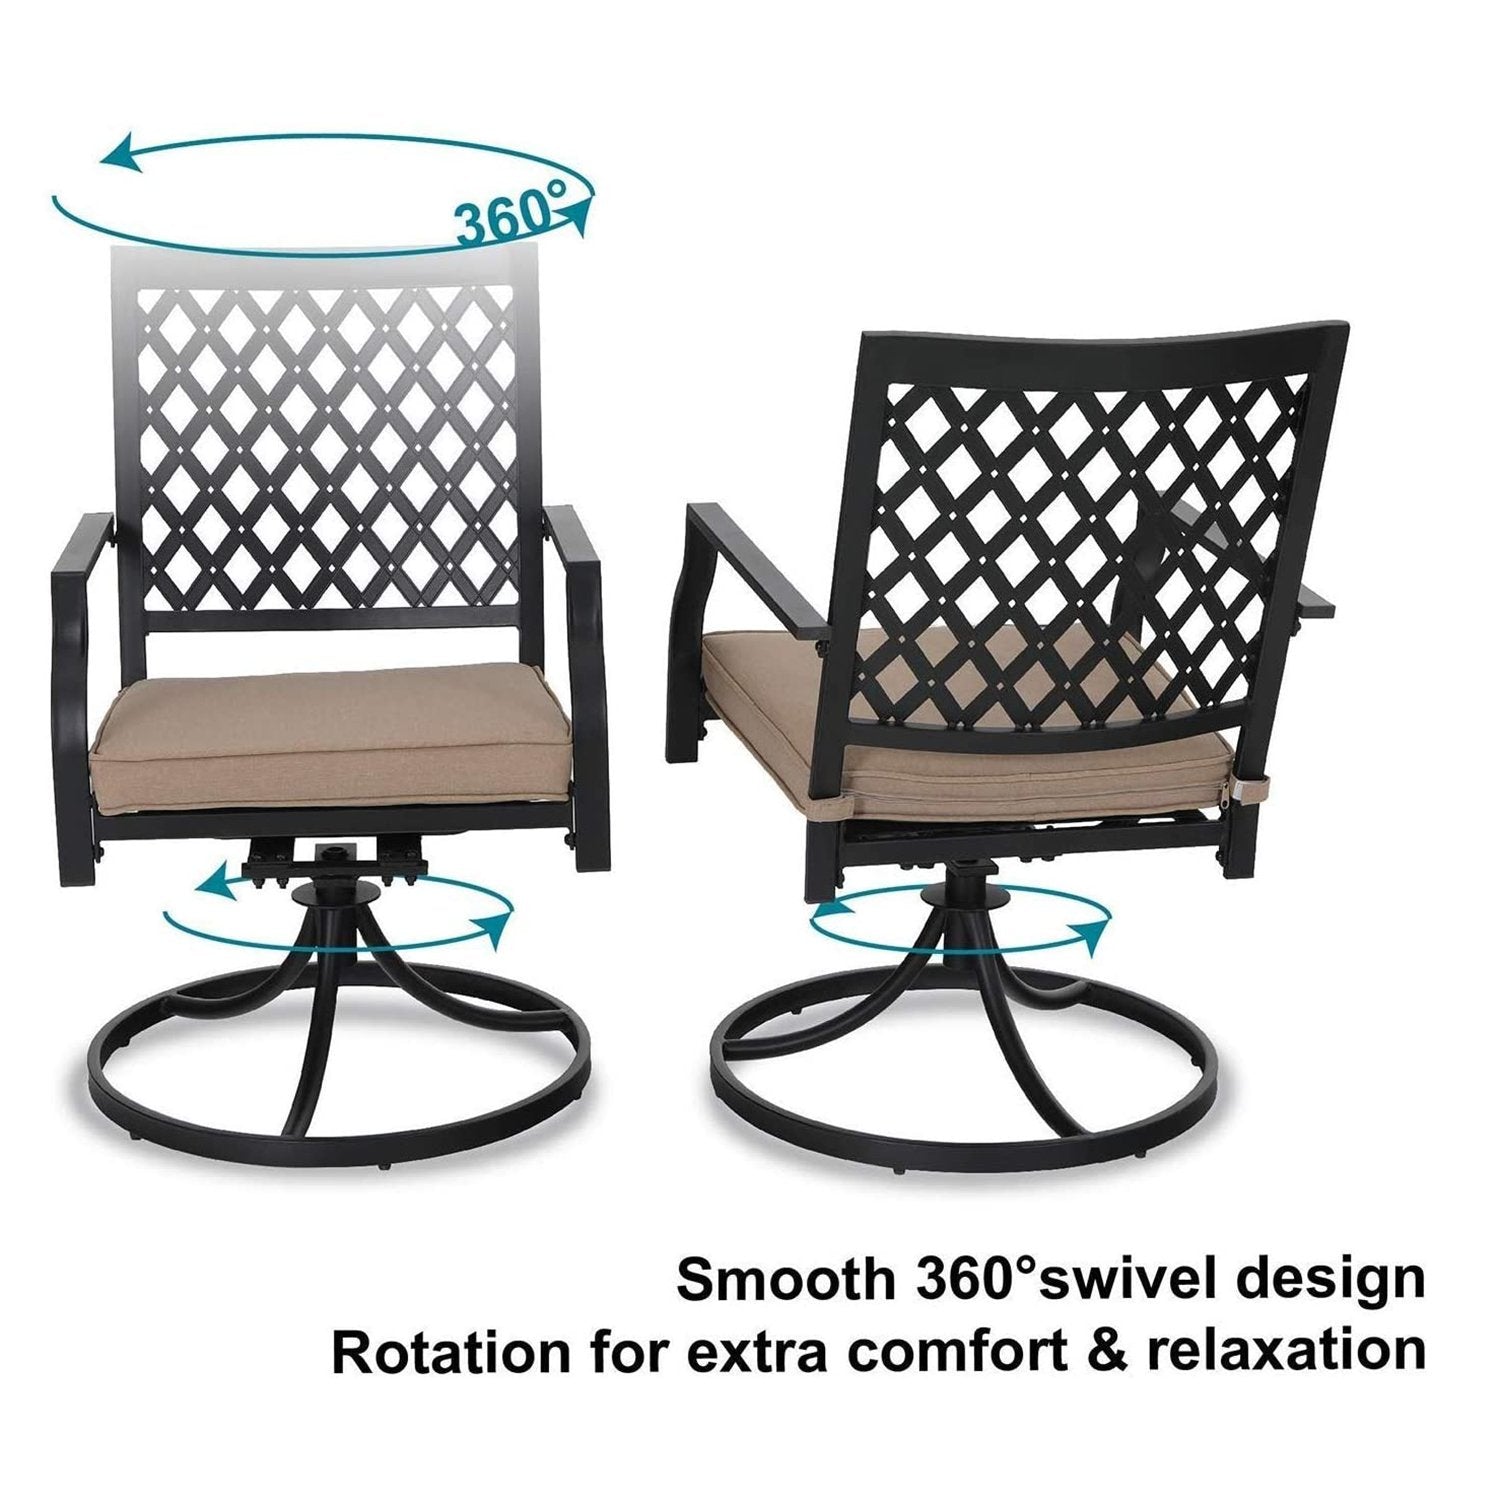 PHI VILLA 9/7-Piece Patio Dining Set Reinforced Expandable Table & Stackable Steel Fixed Chairs